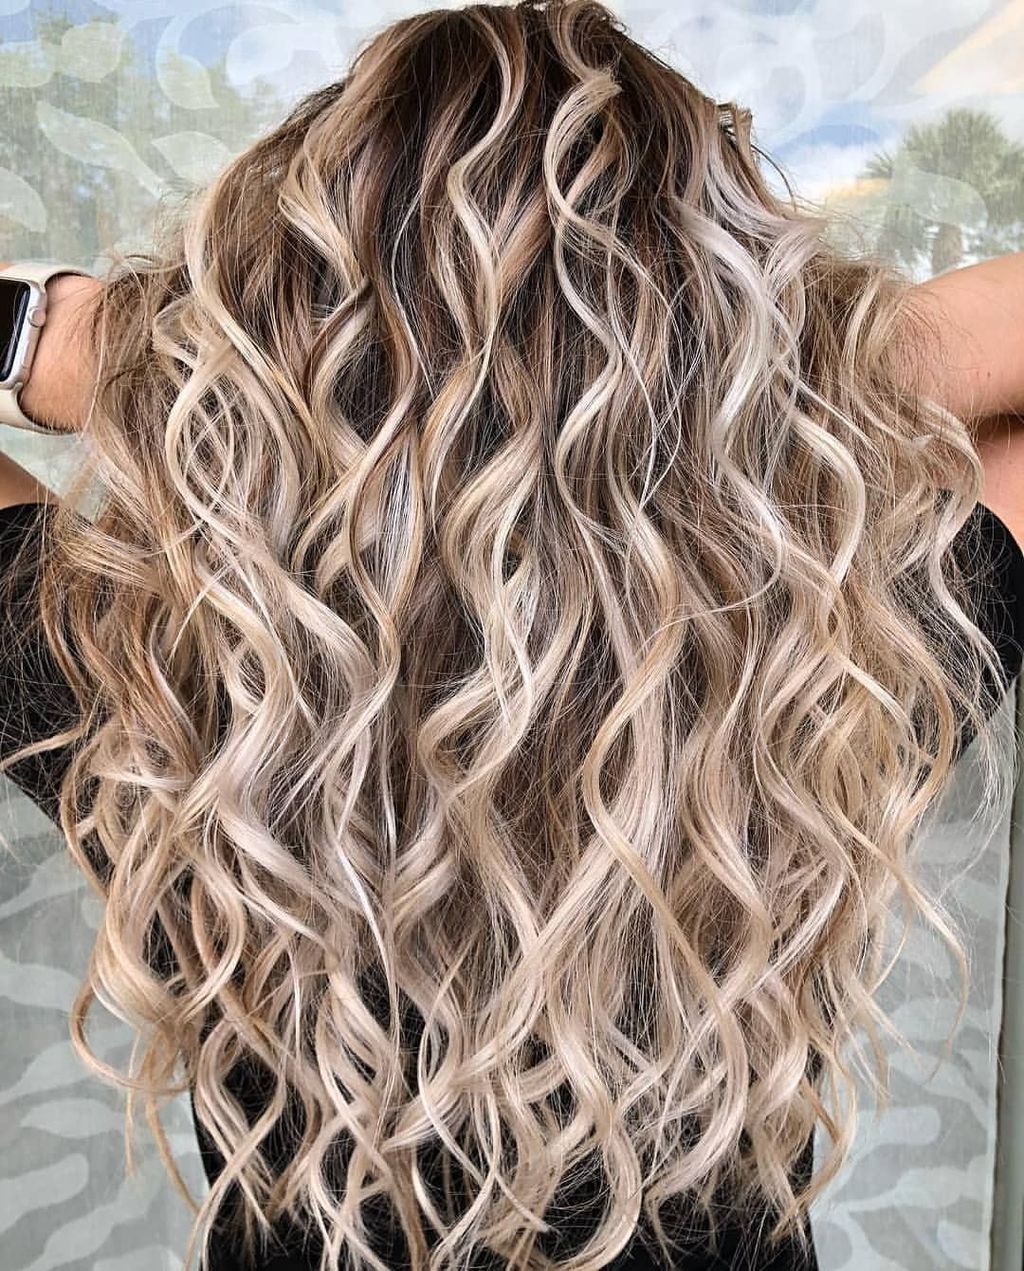 41 Fashionable Hair Color Ideas For Winter 2019 -   16 hair Thin awesome ideas